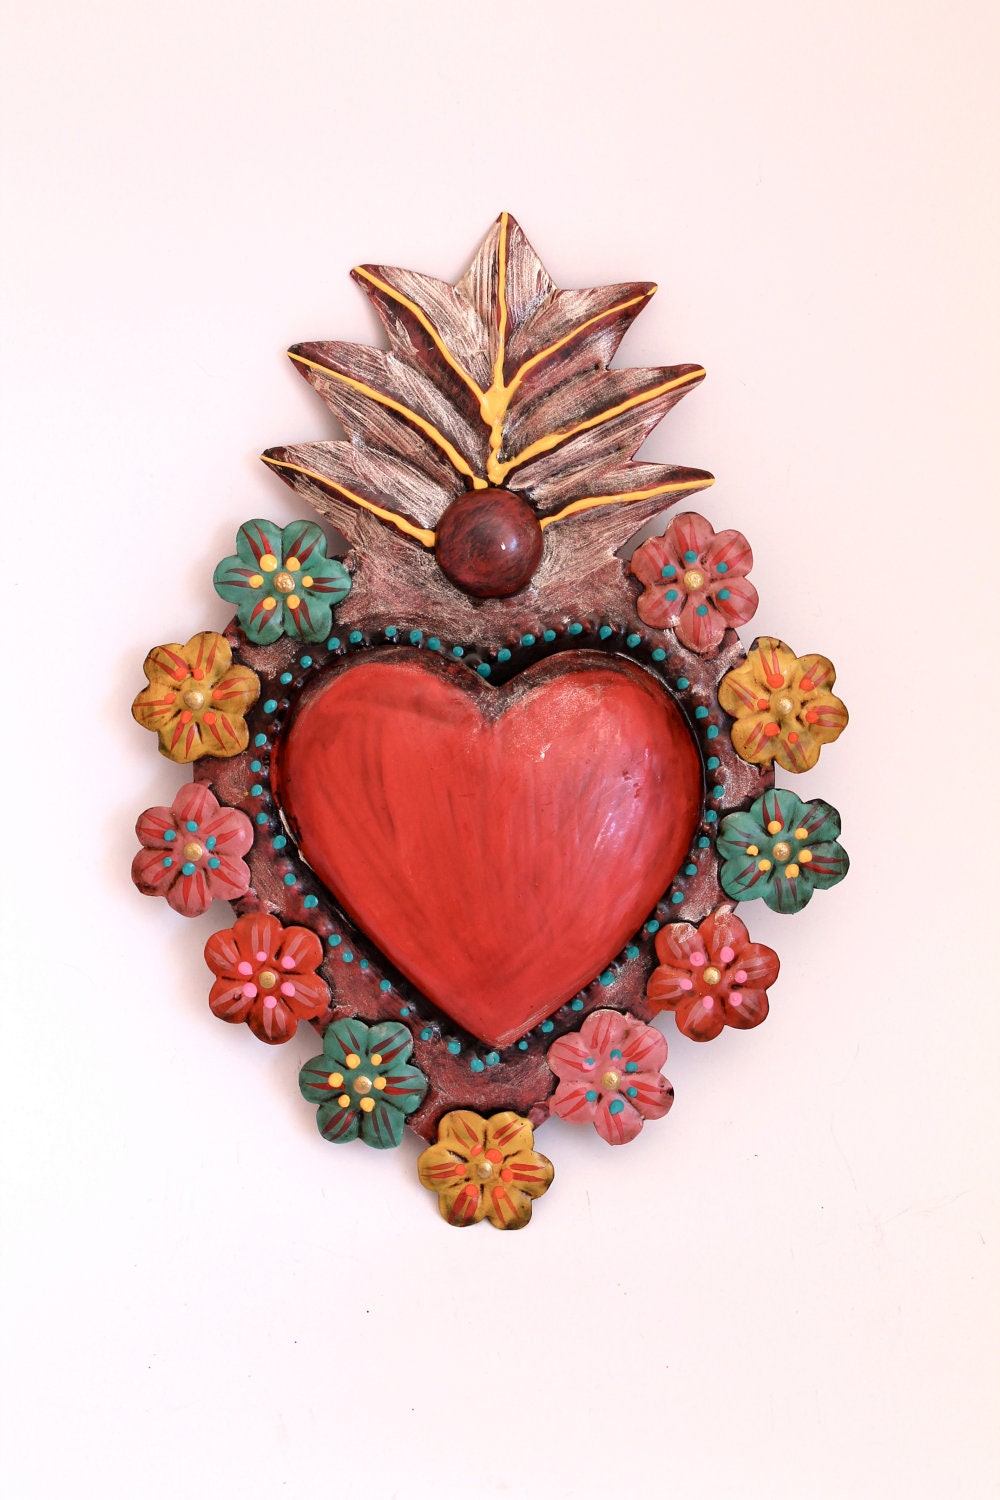 Tin sacred heart Mexican wall art multicolored flowers flora